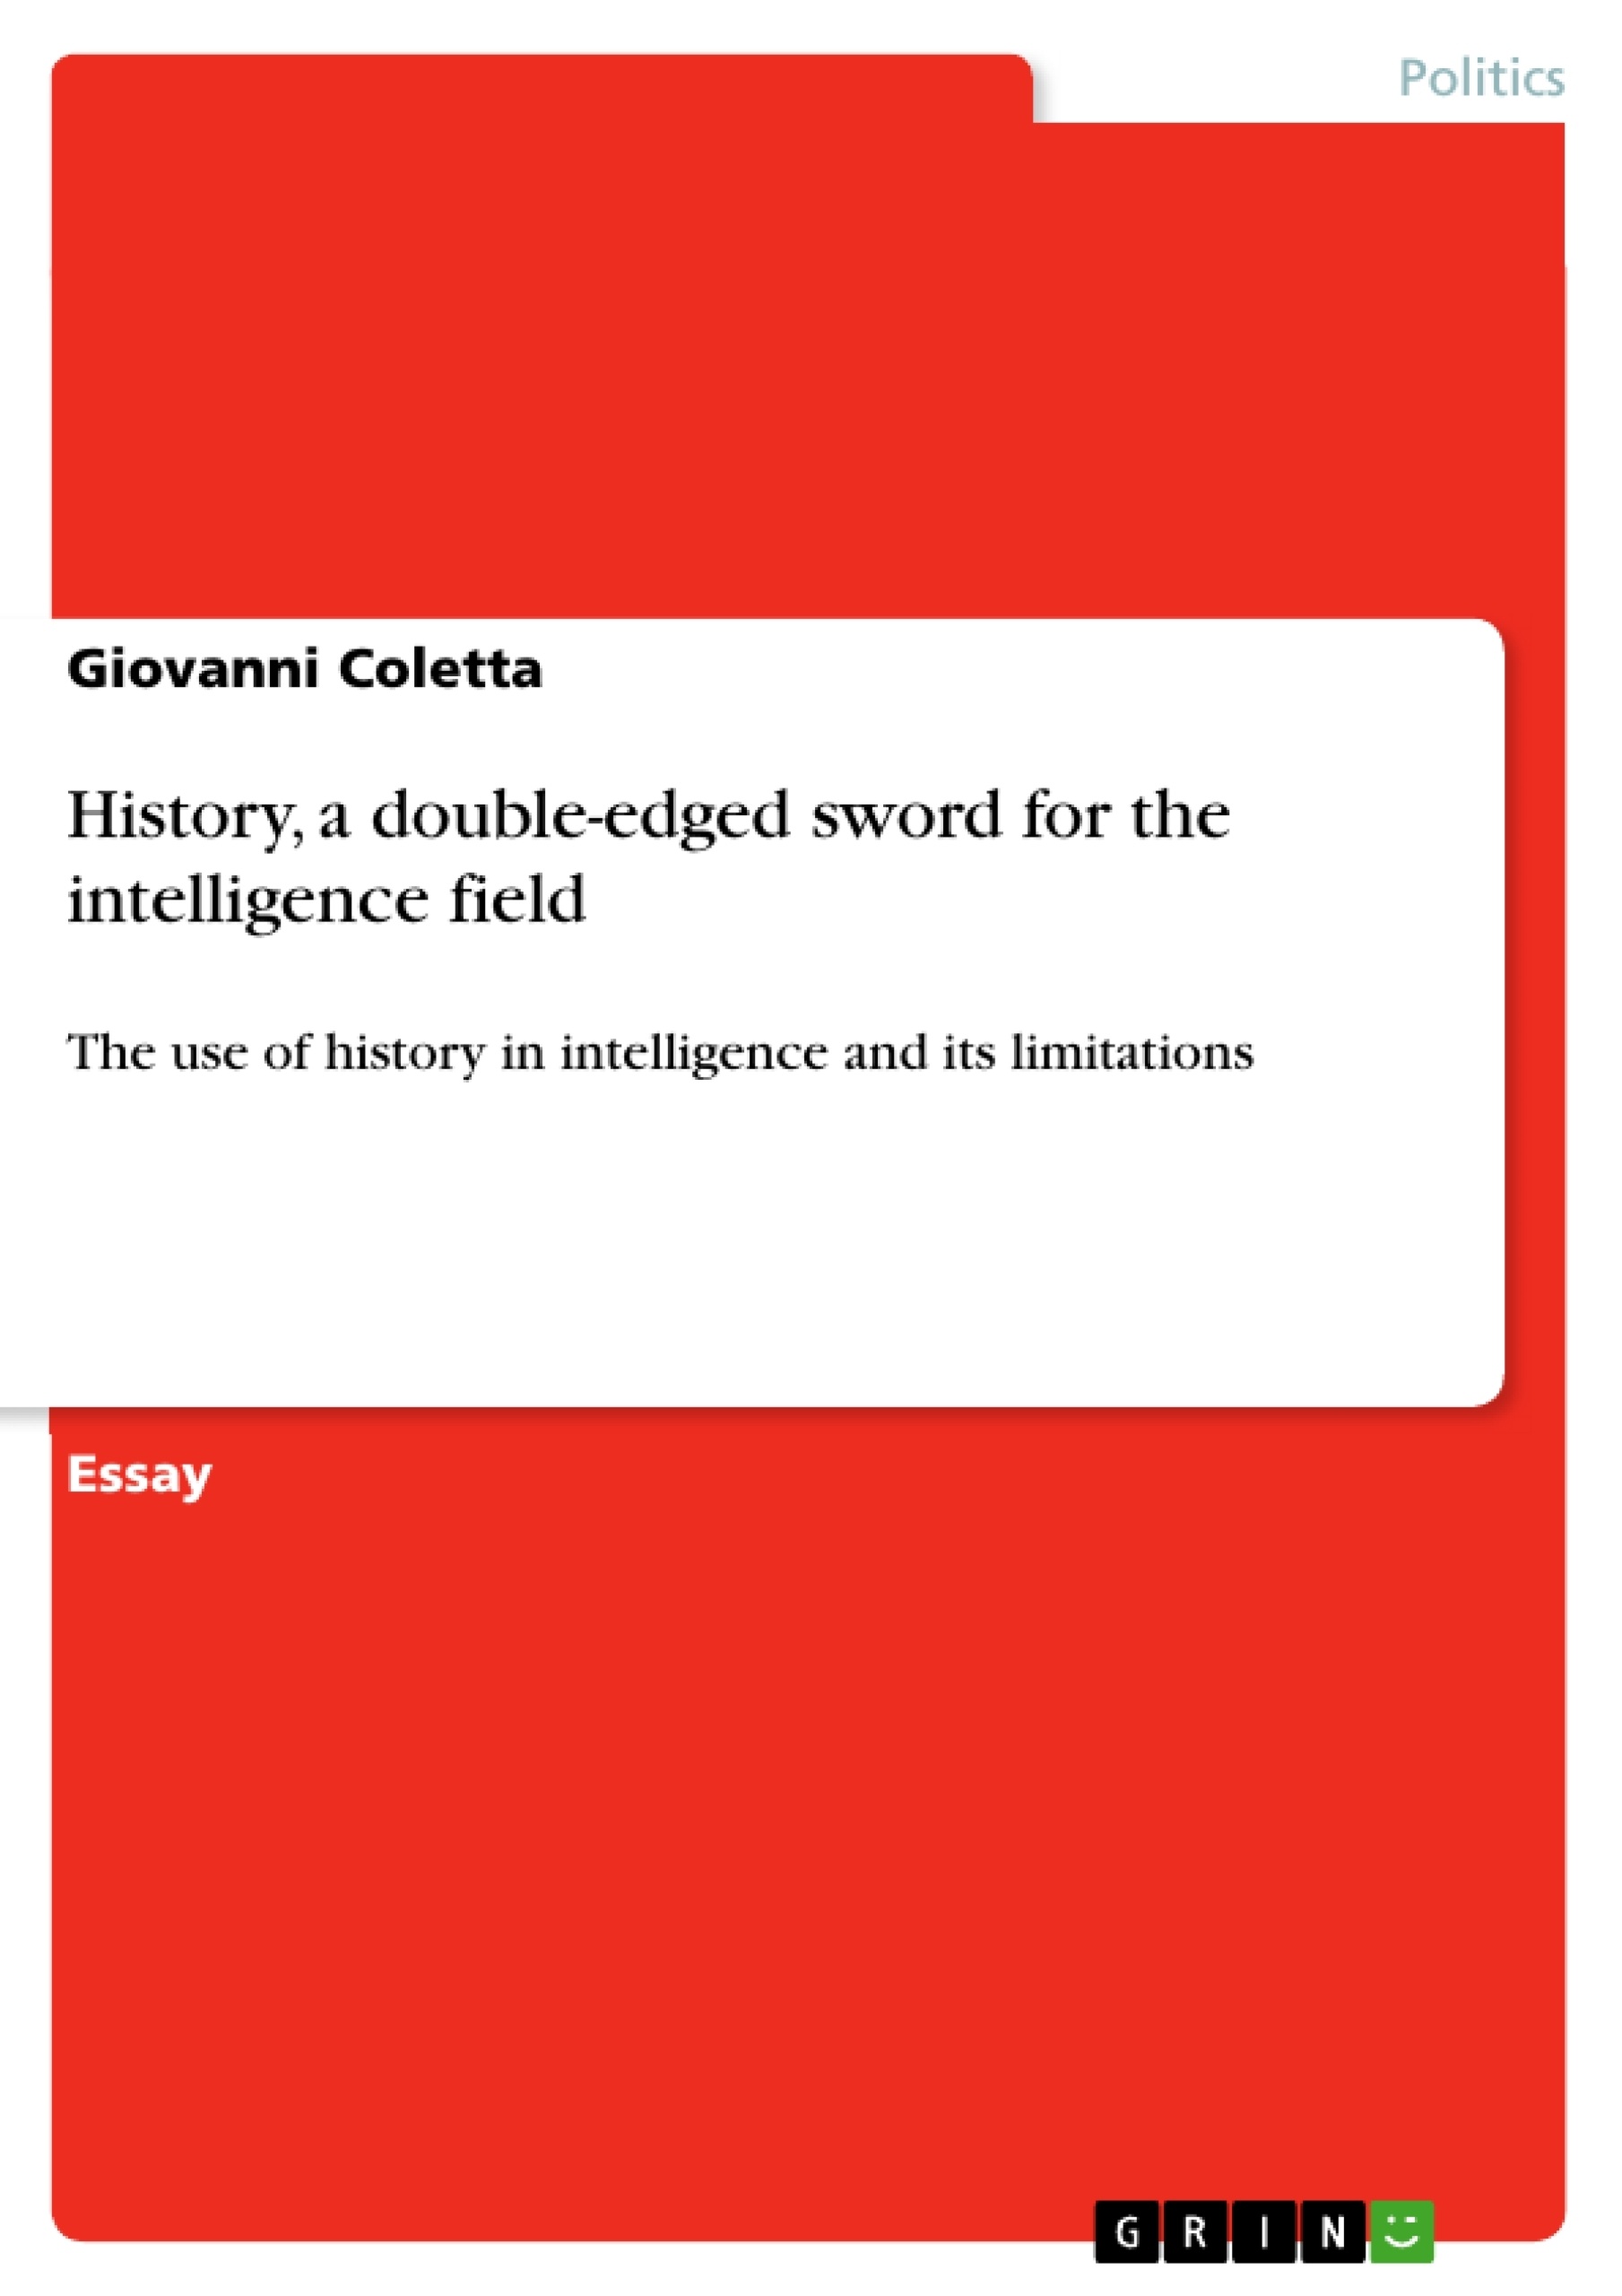 Titel: History, a double-edged sword for the intelligence field